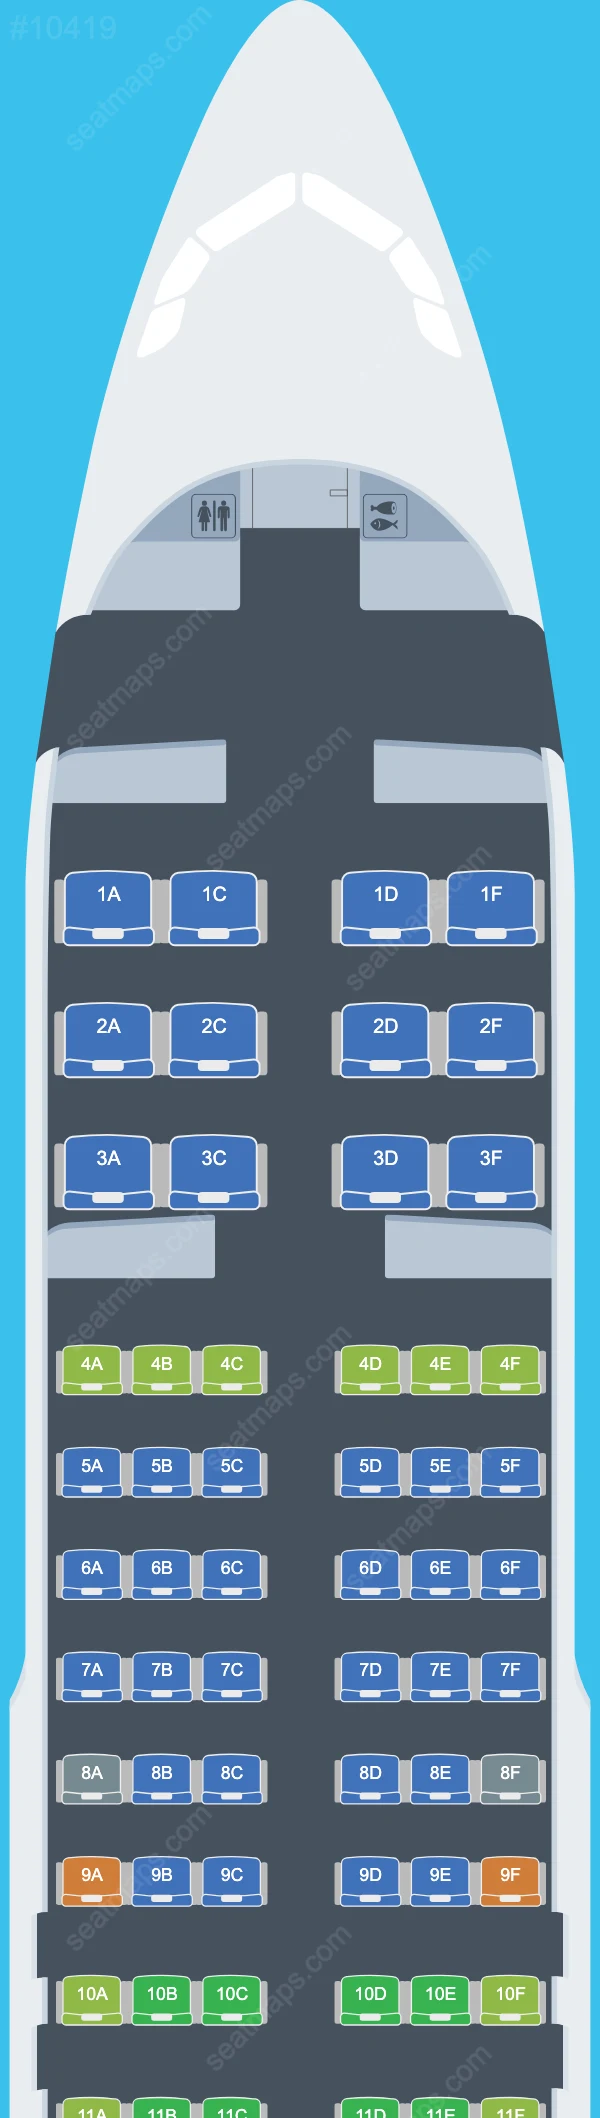 flyCAA Airbus A320 Seat Maps A320-200 V.2